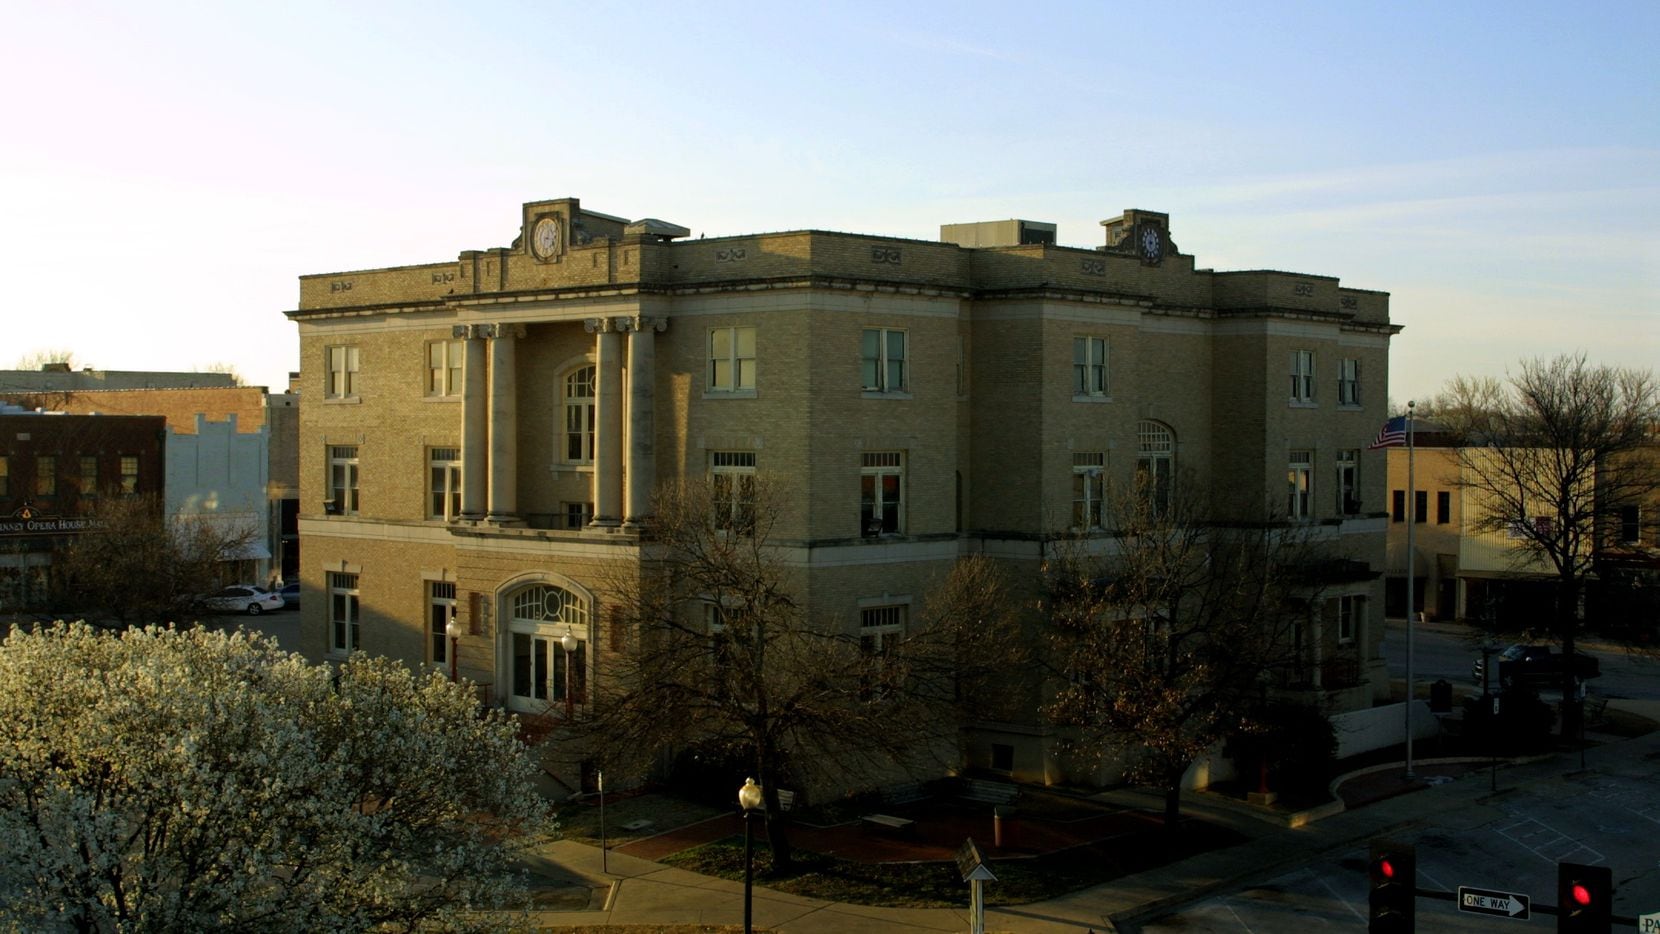 03/13/03  The Old Collin County Courthouse on the square in McKinney. The building was named...